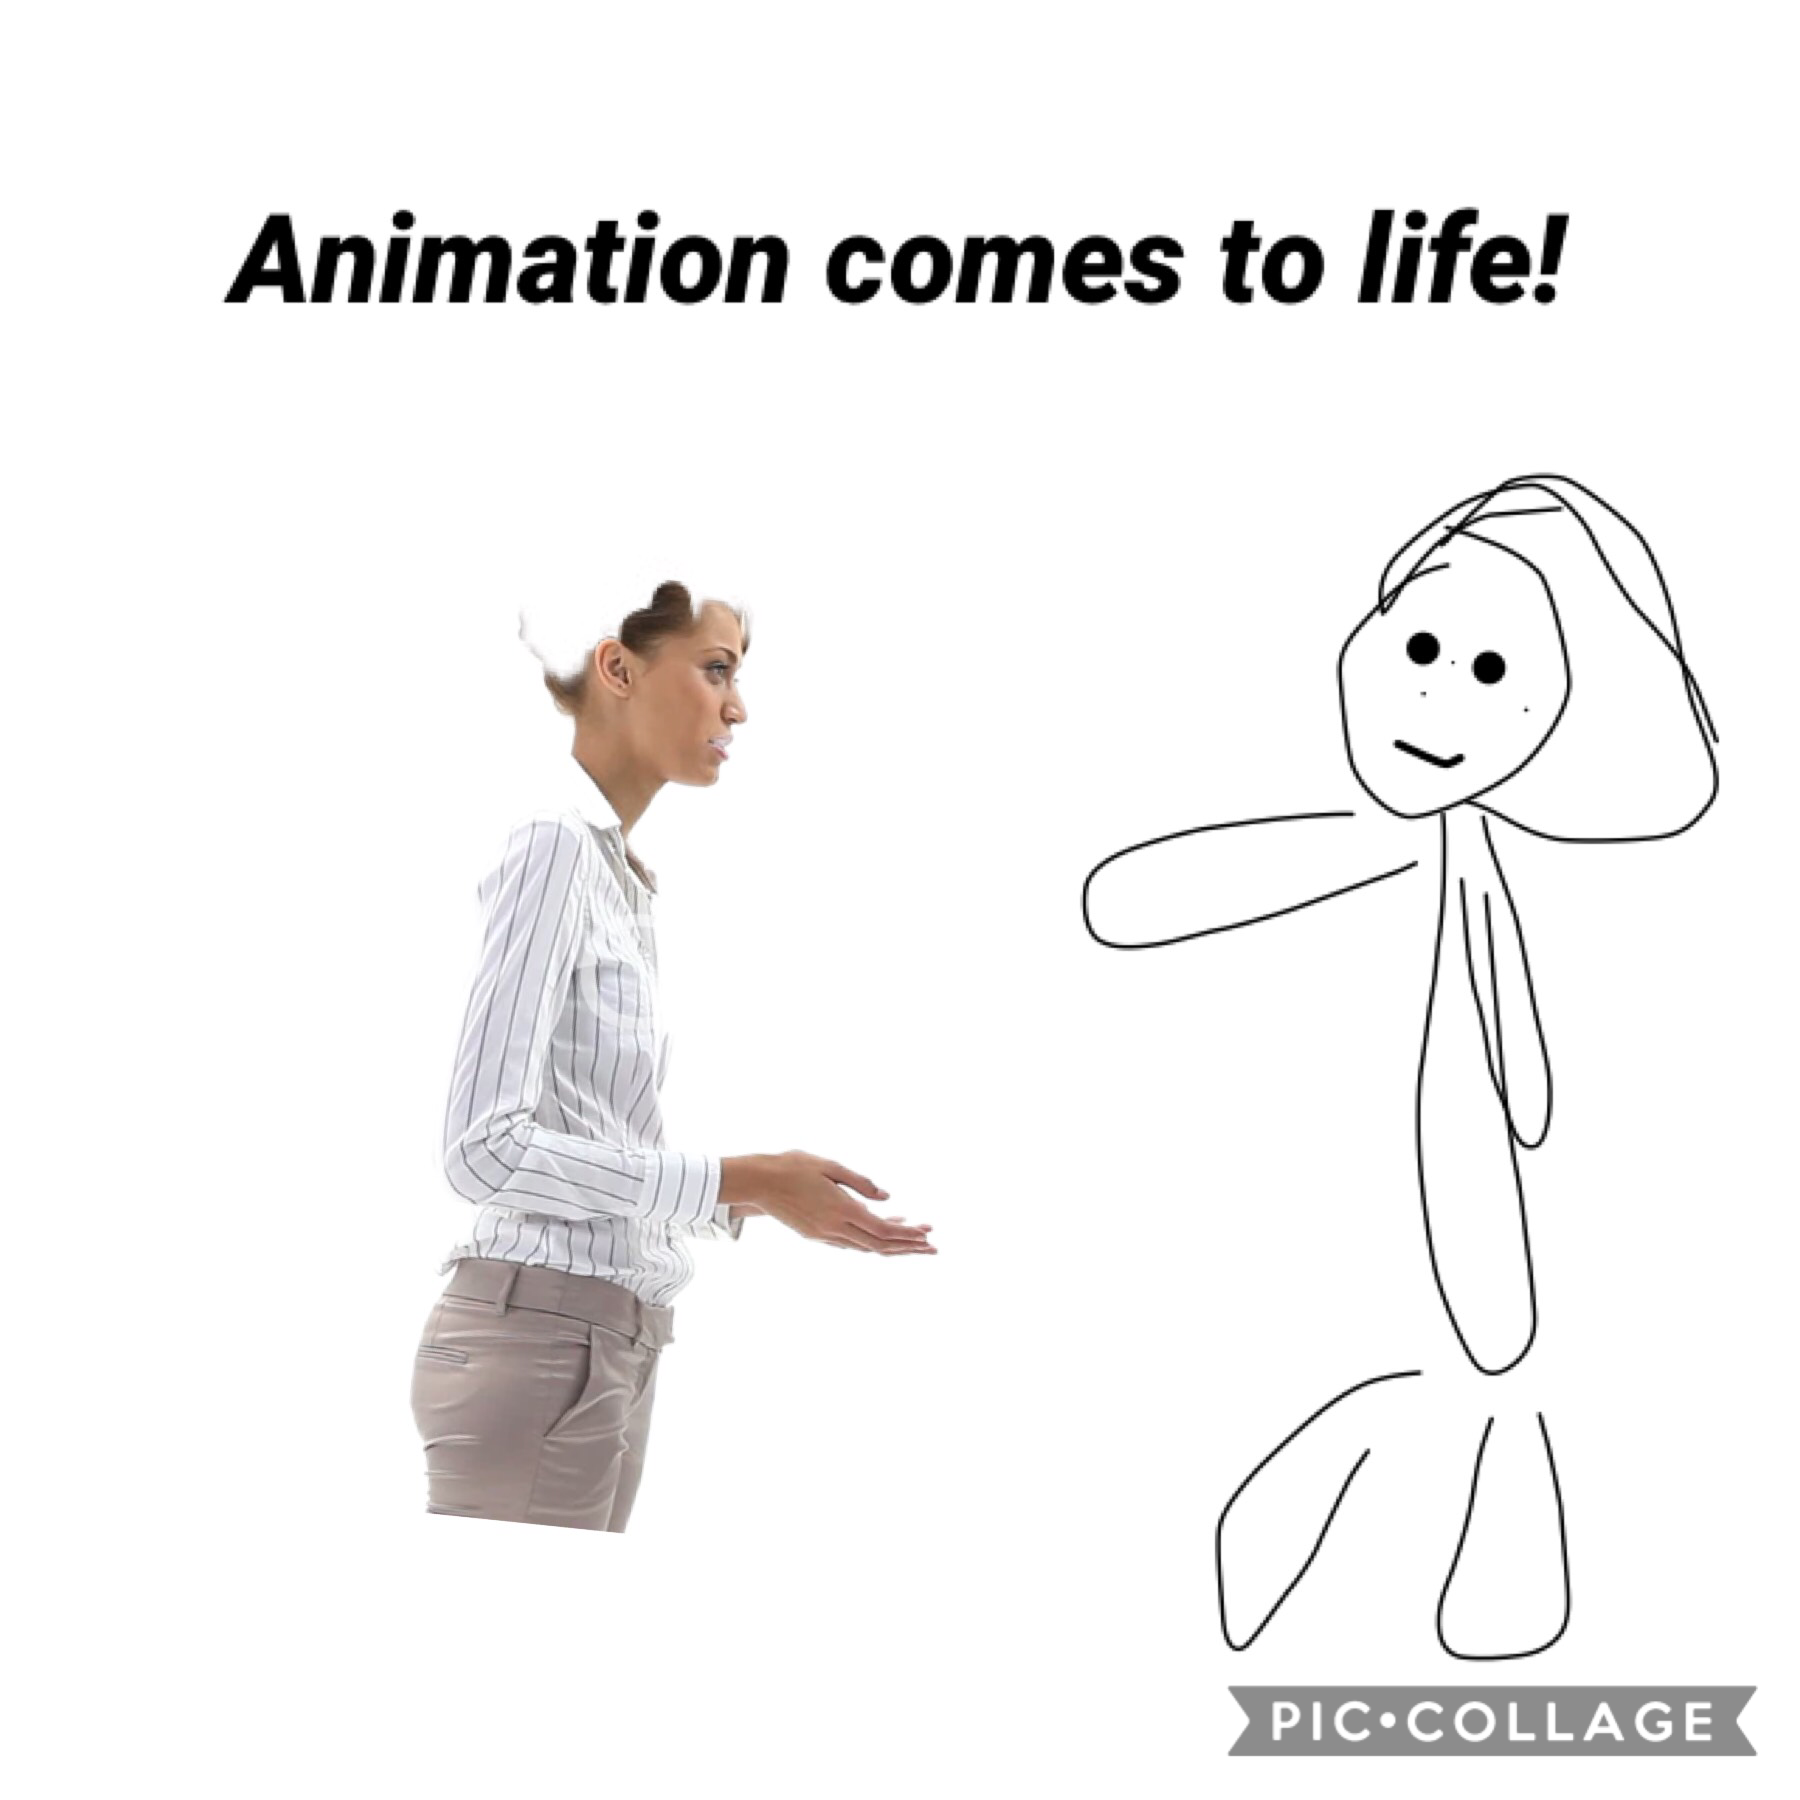 A real person and an animated person are all in one Collage!